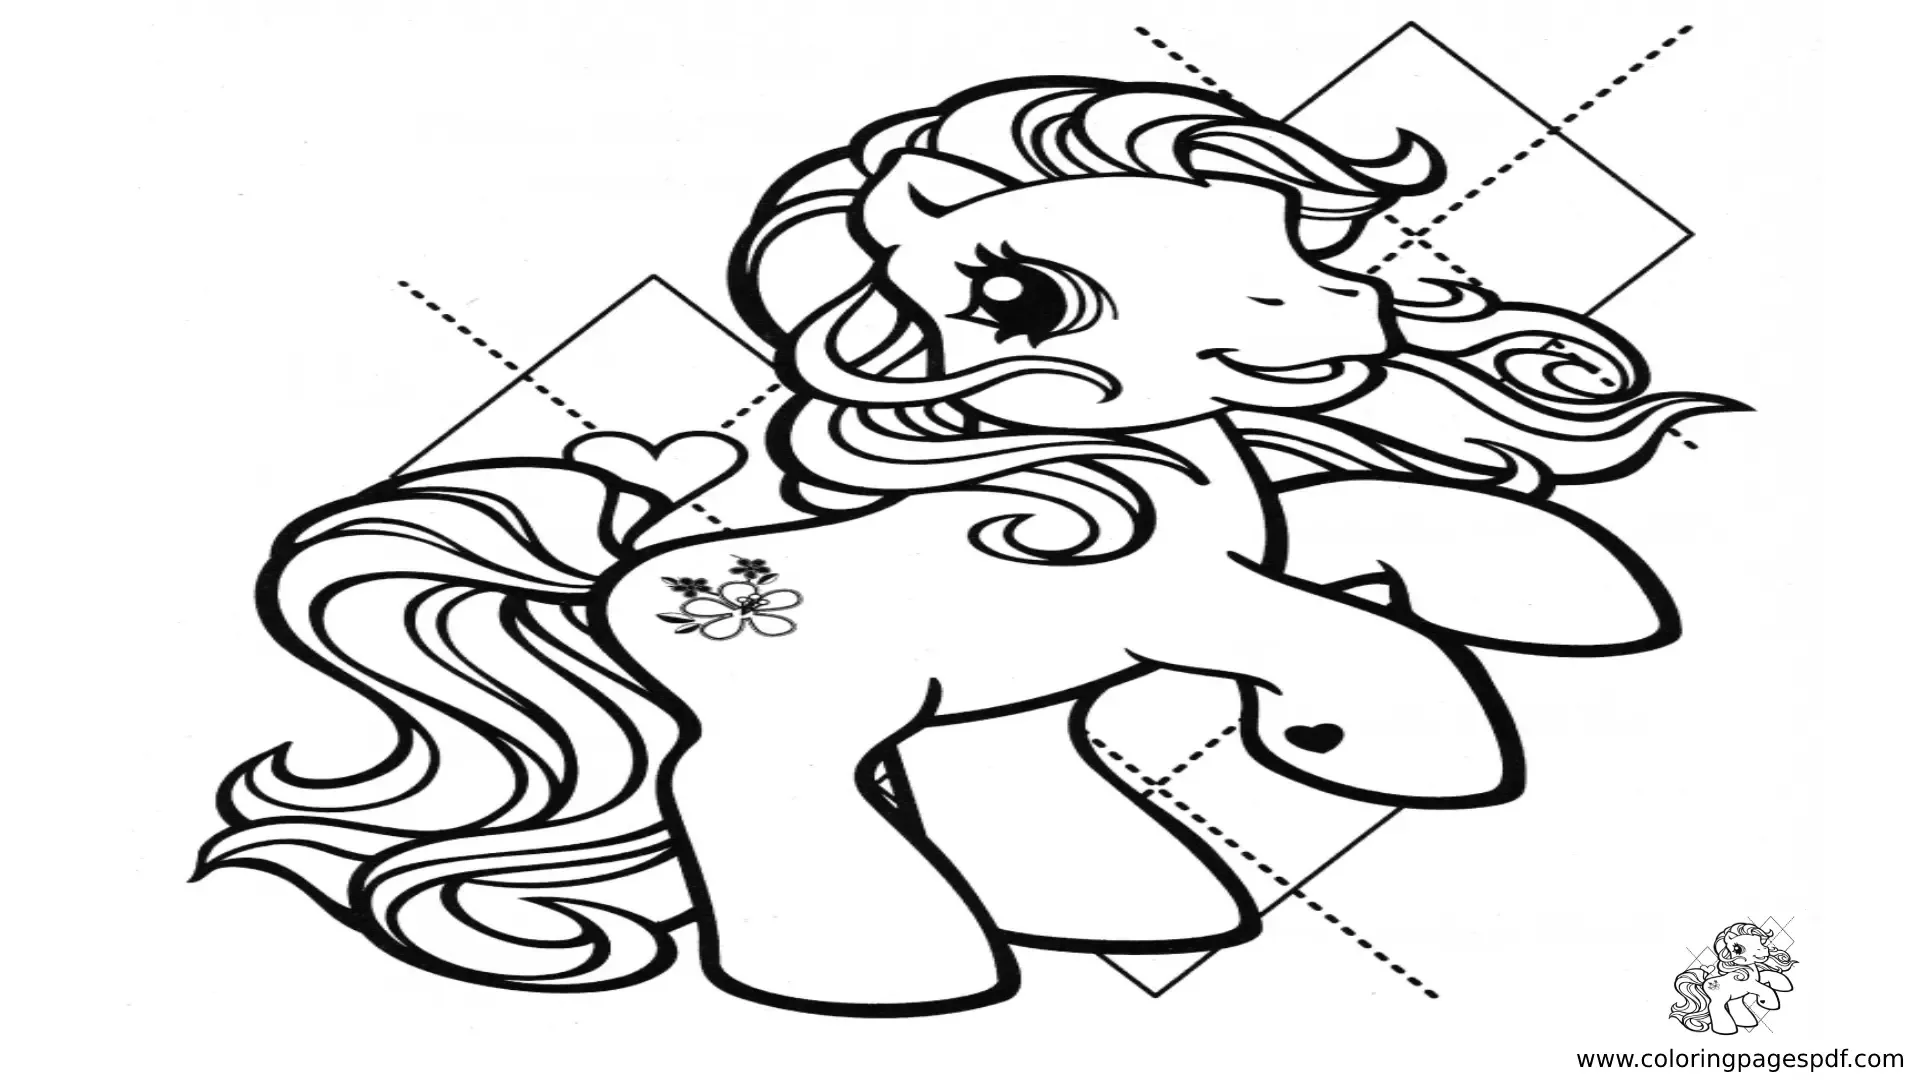 Coloring Pages Of A Rearing Pony